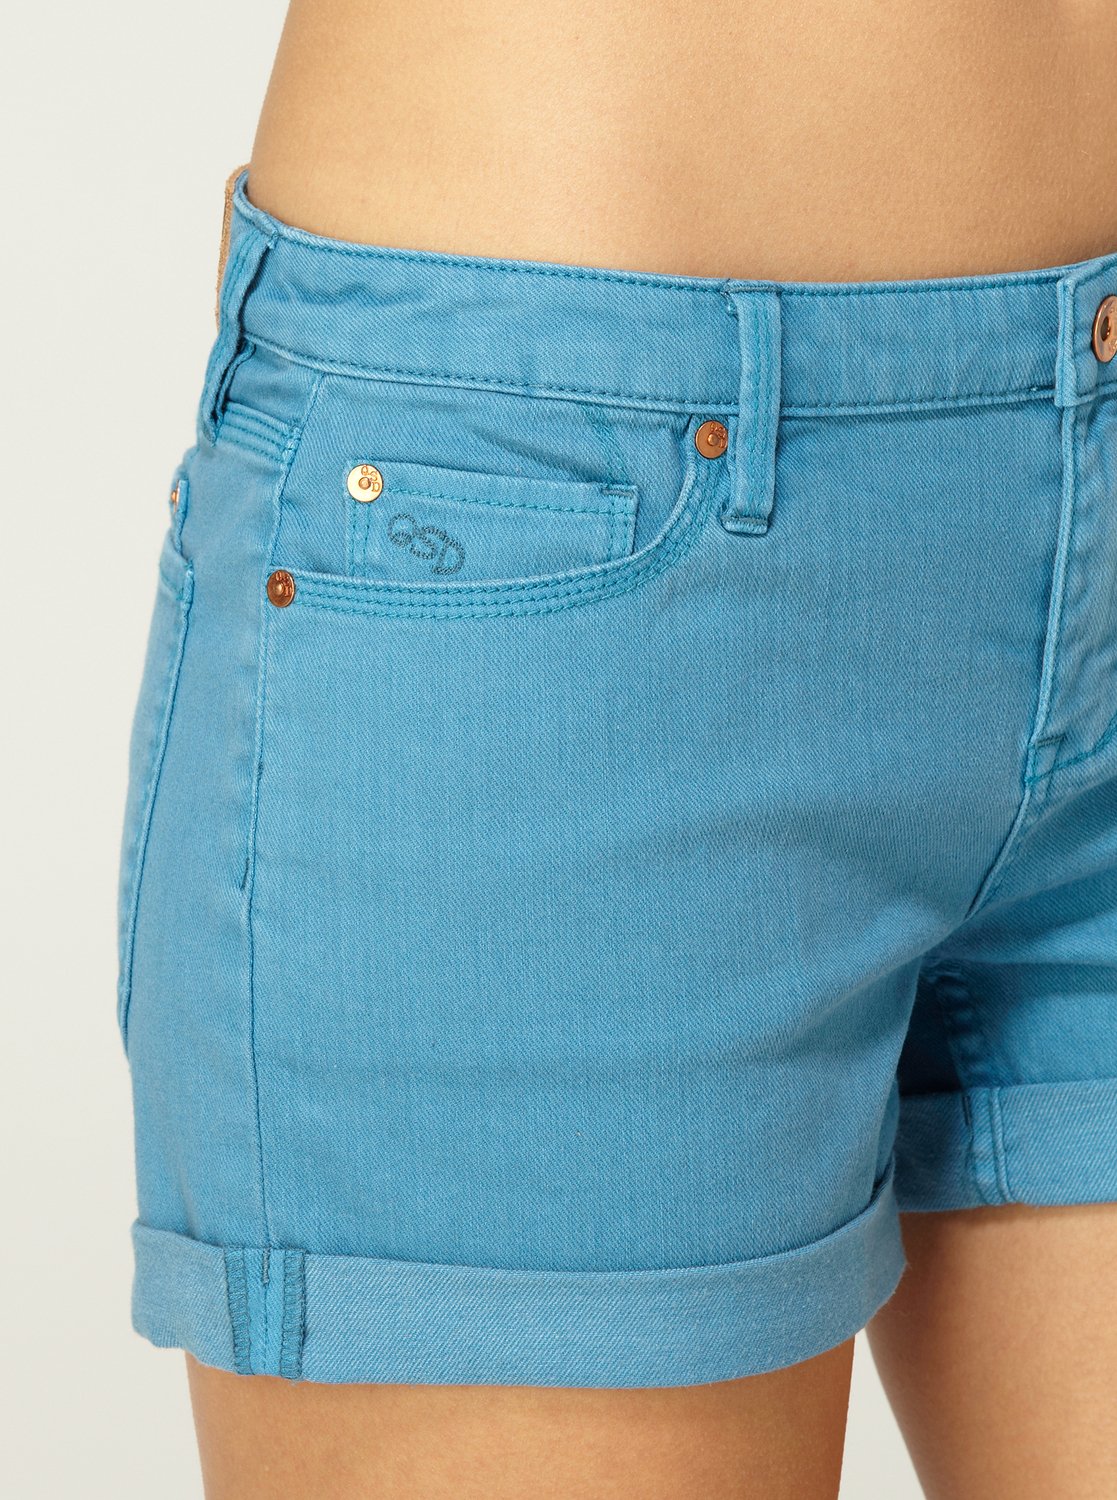 Gypsy Tour Turkish Teal Shorts G11102 | Quiksilver